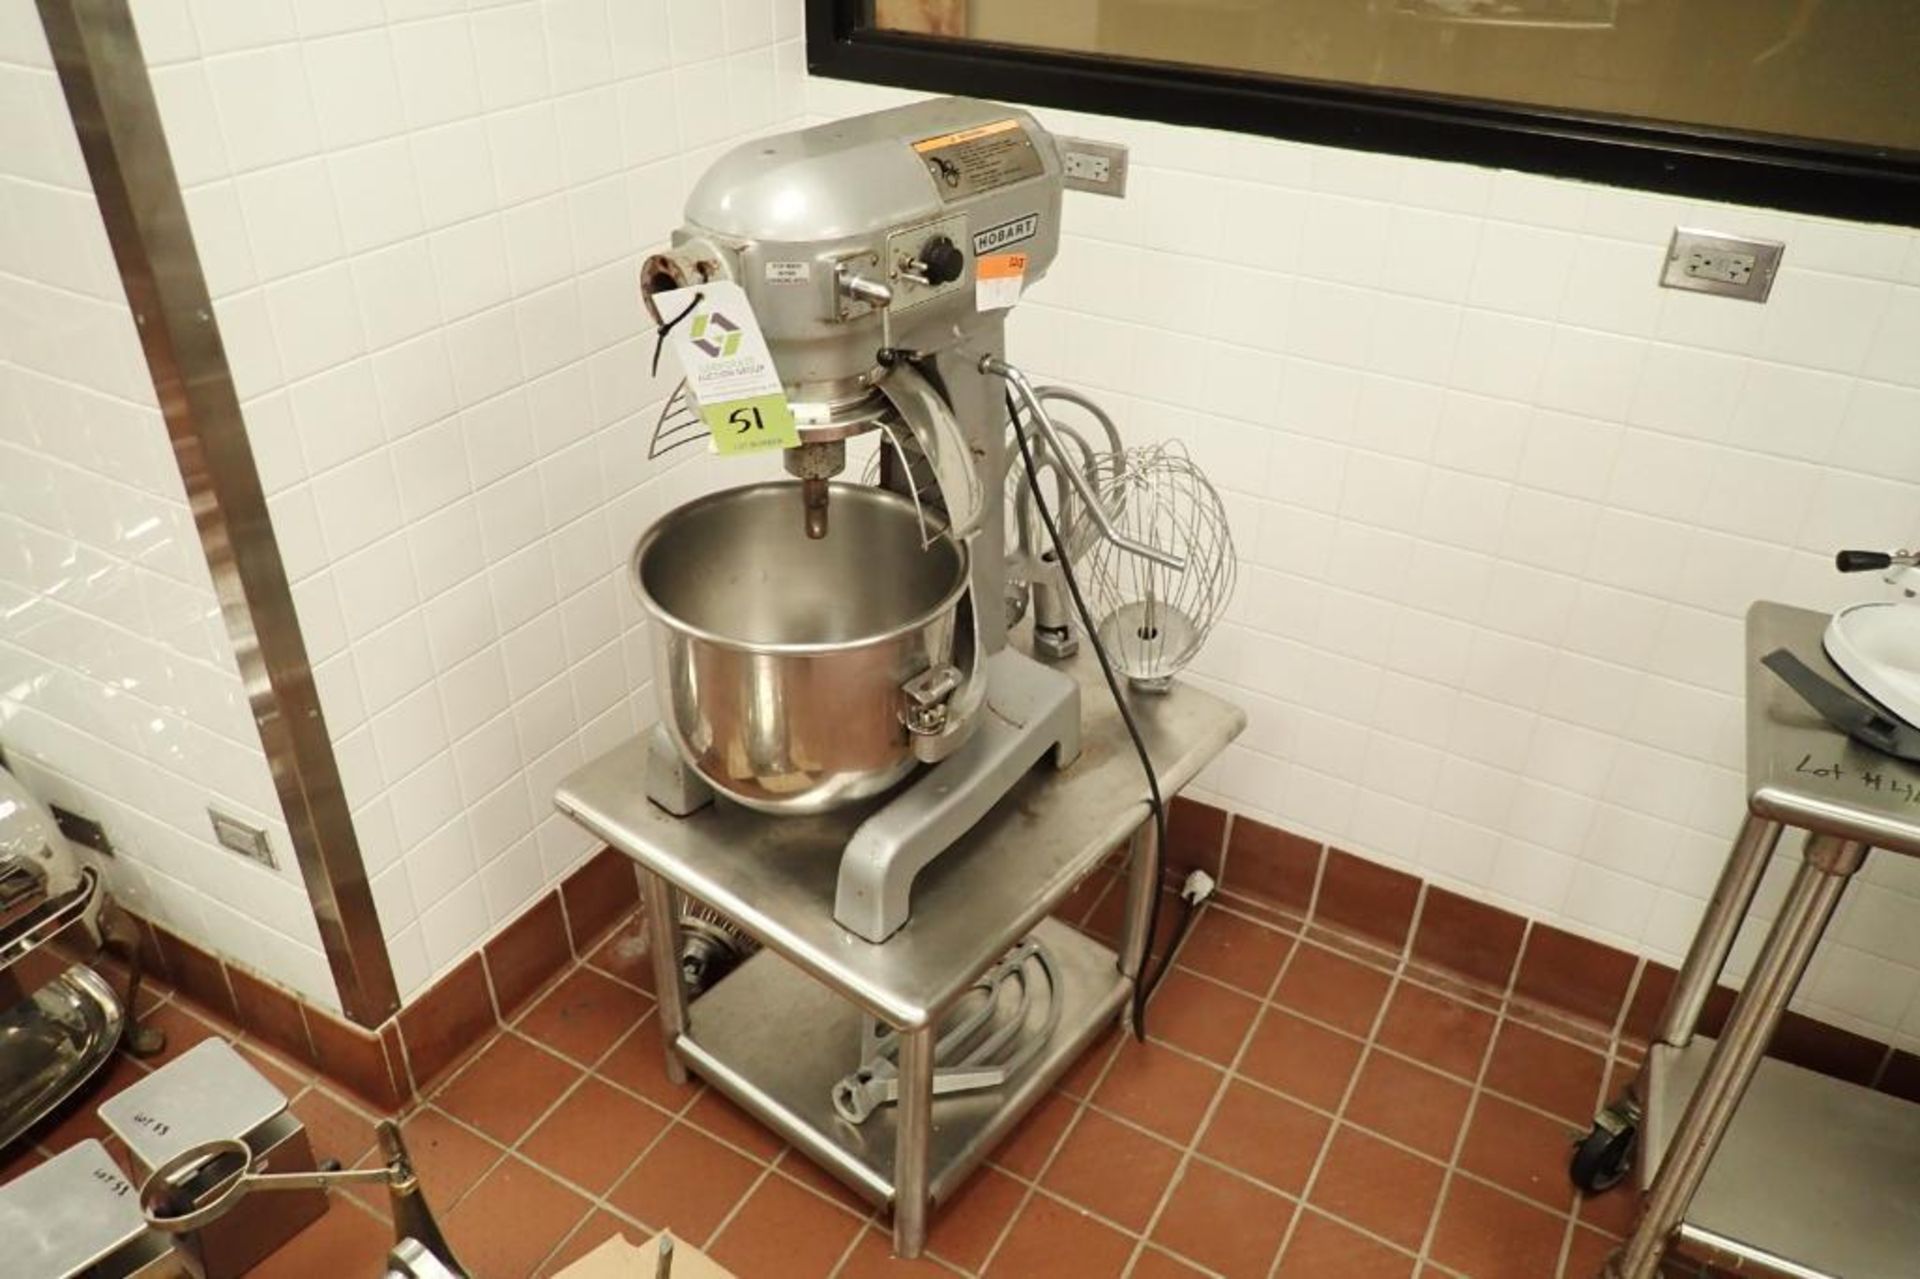 Hobart mixer, Model A200T, SN 31-1199-789, with (3) whisks, (2) paddles, grinder head, SS bowl, with